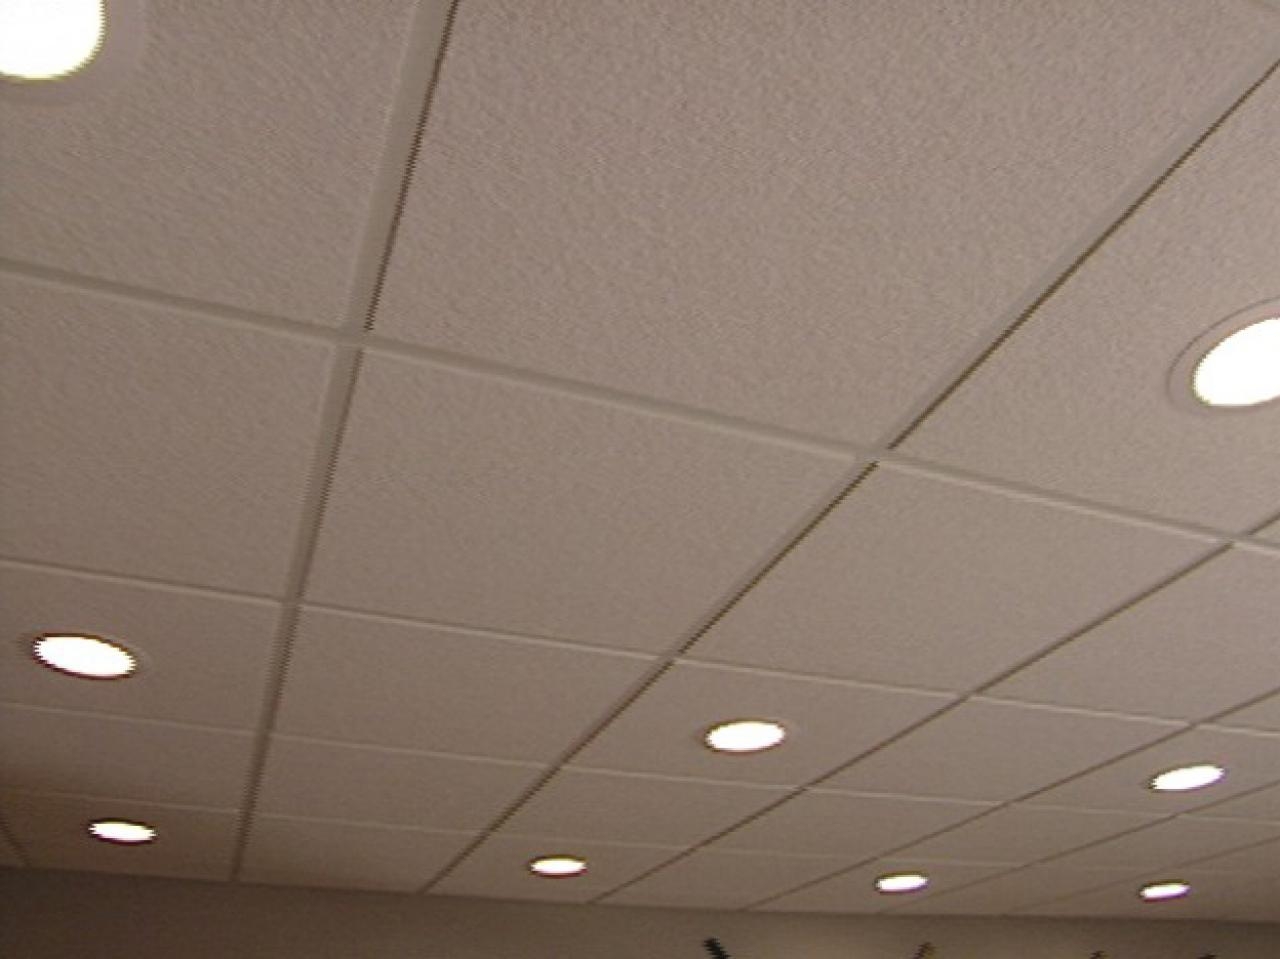 Permalink to Lighting For Drop Ceiling Tiles